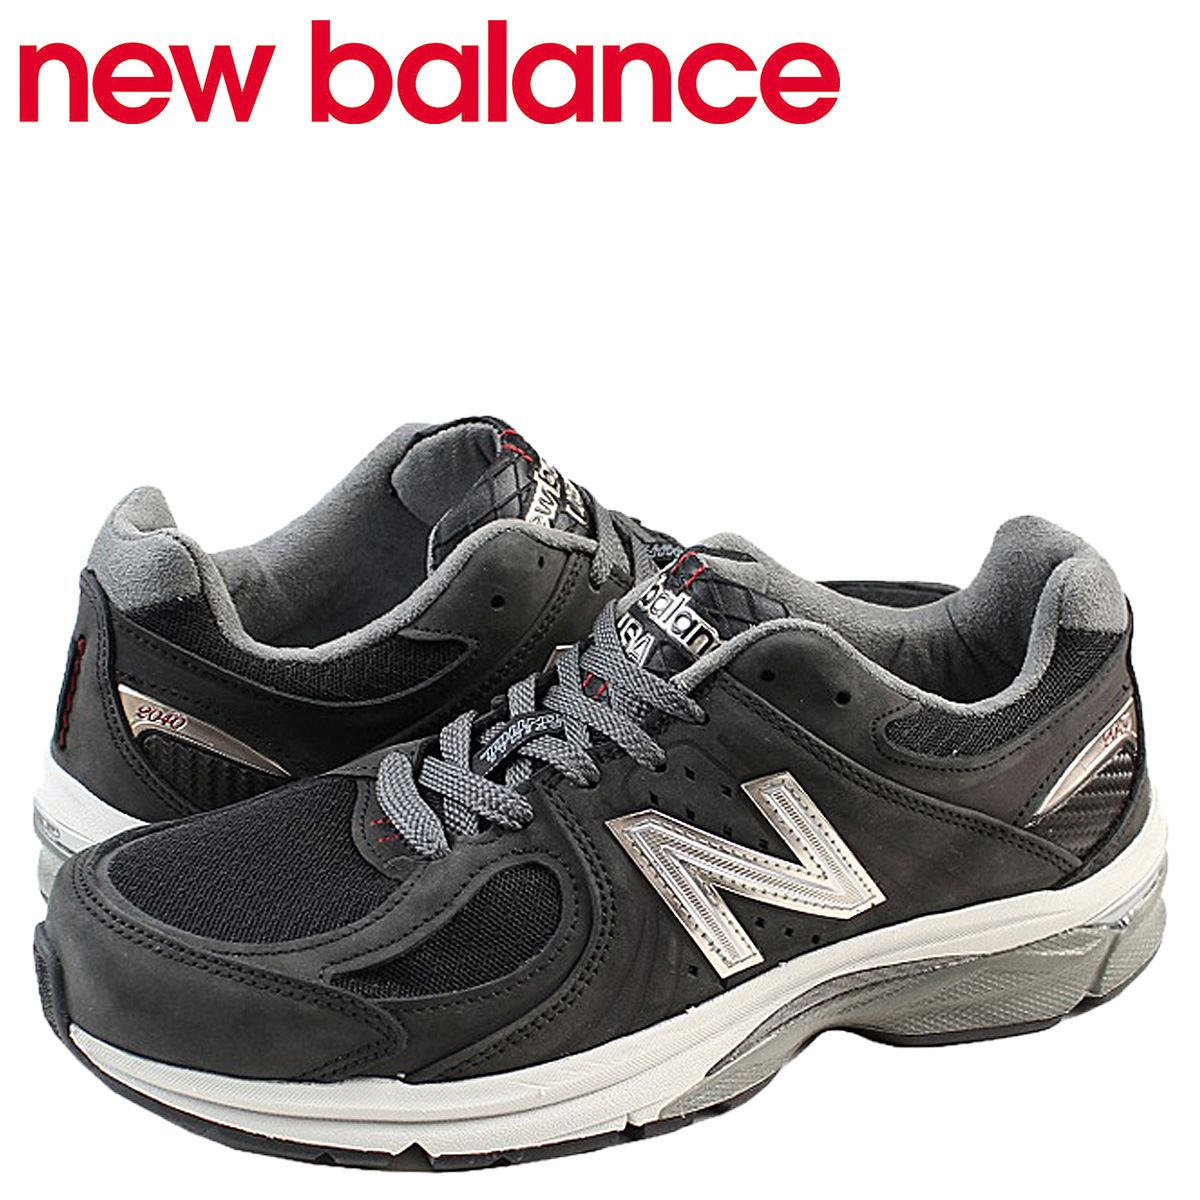 new balance sneakers arch support